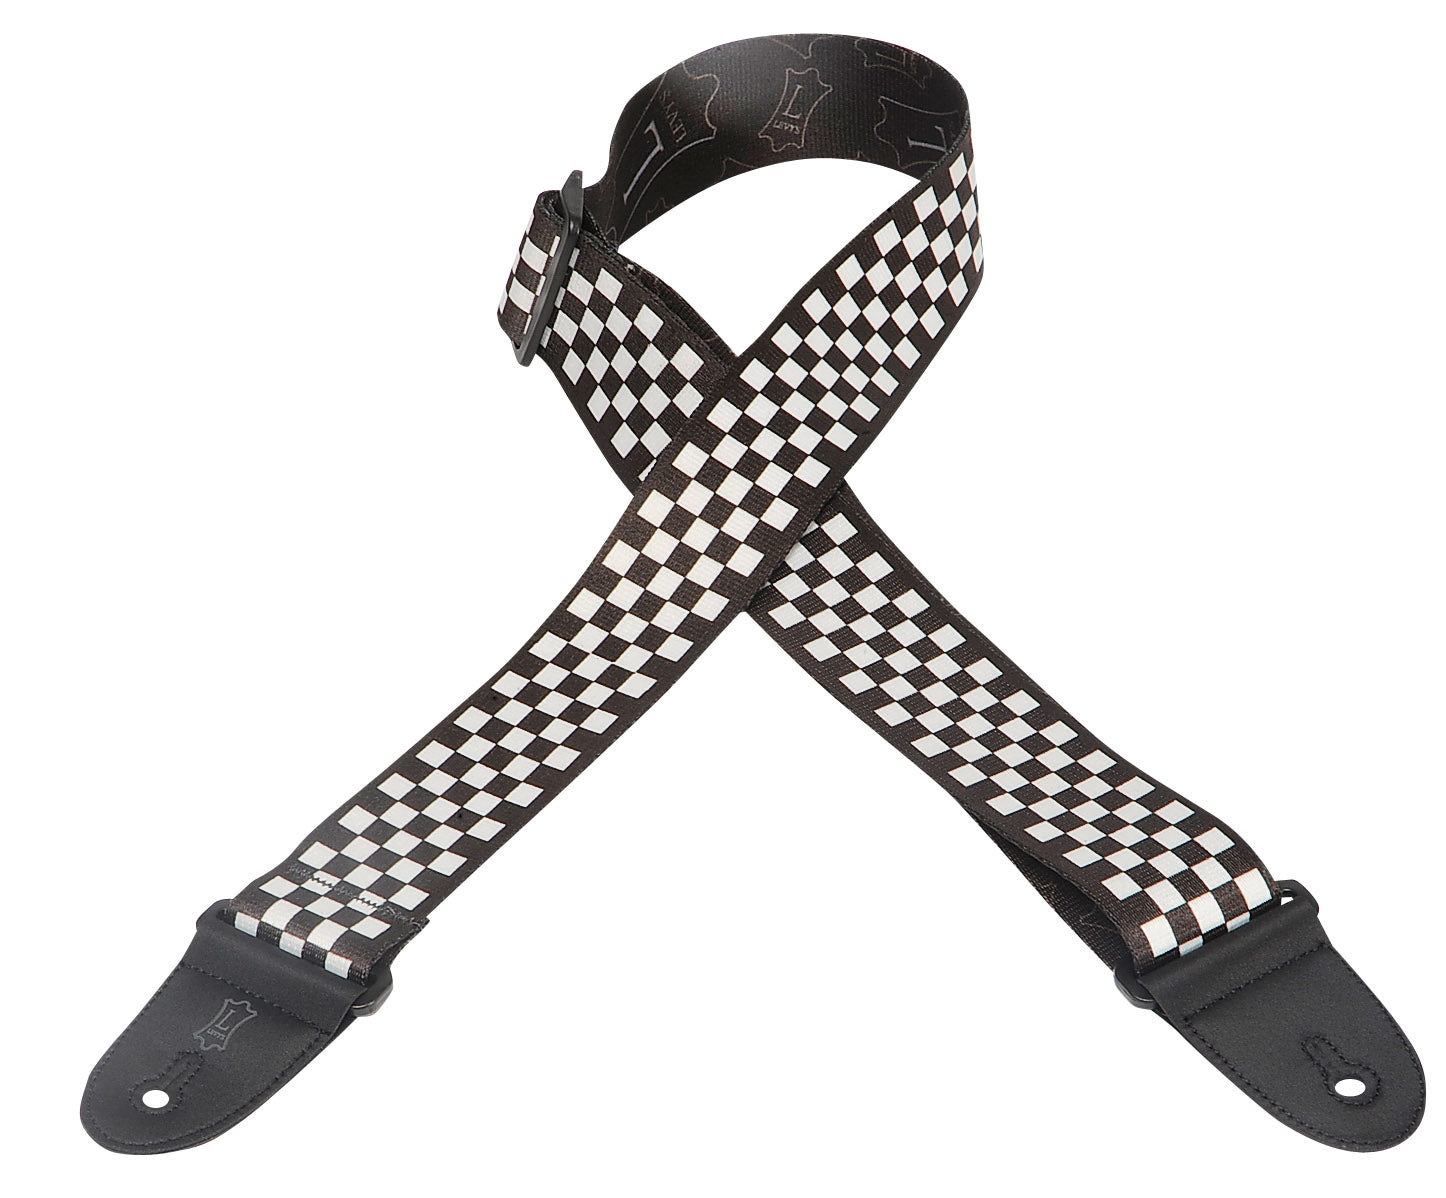 LEVY'S 2" POLYESTER GUITAR STRAP WITH PRINTED DESIGN BLACK/WHITE CHECK